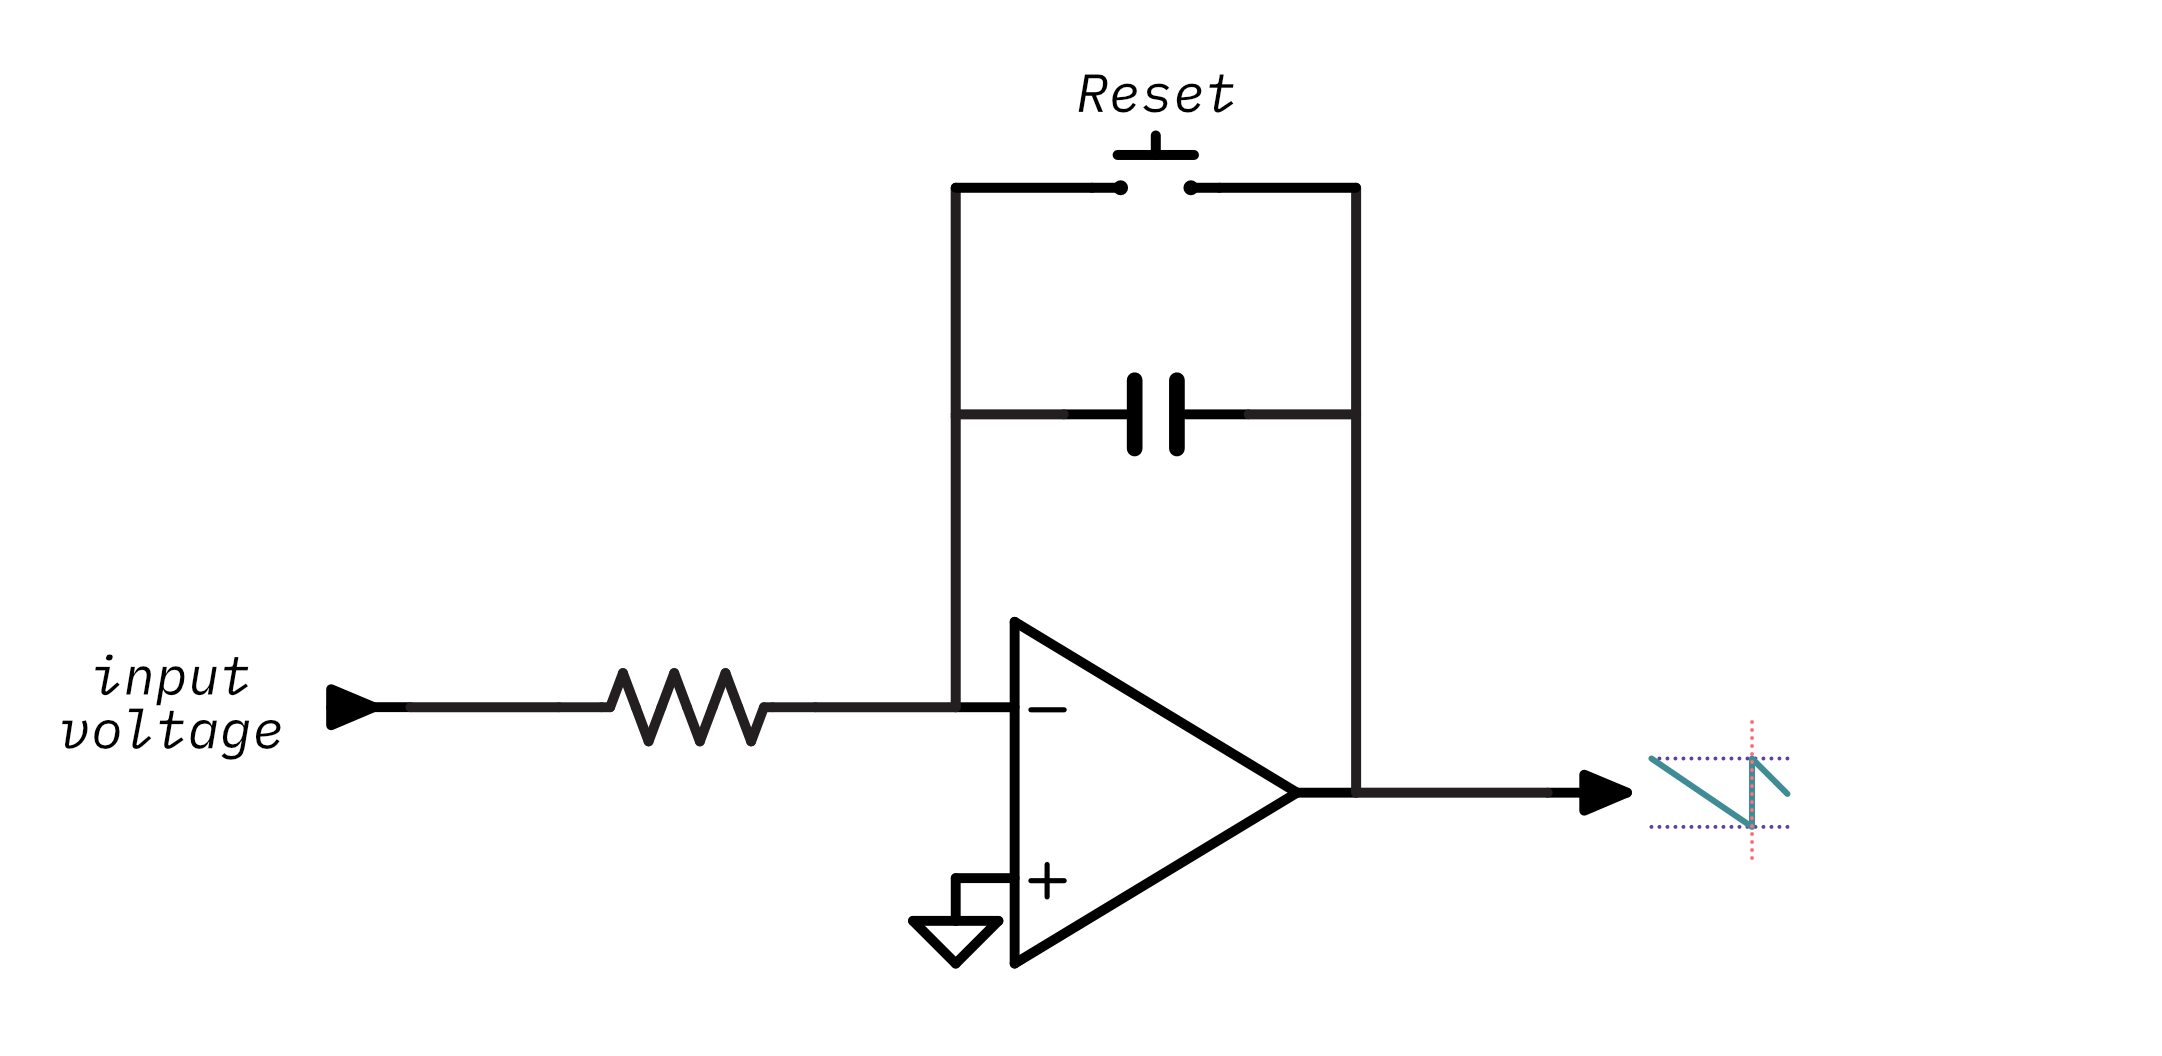 An op-amp integrator with a switch to discharge the capacitor